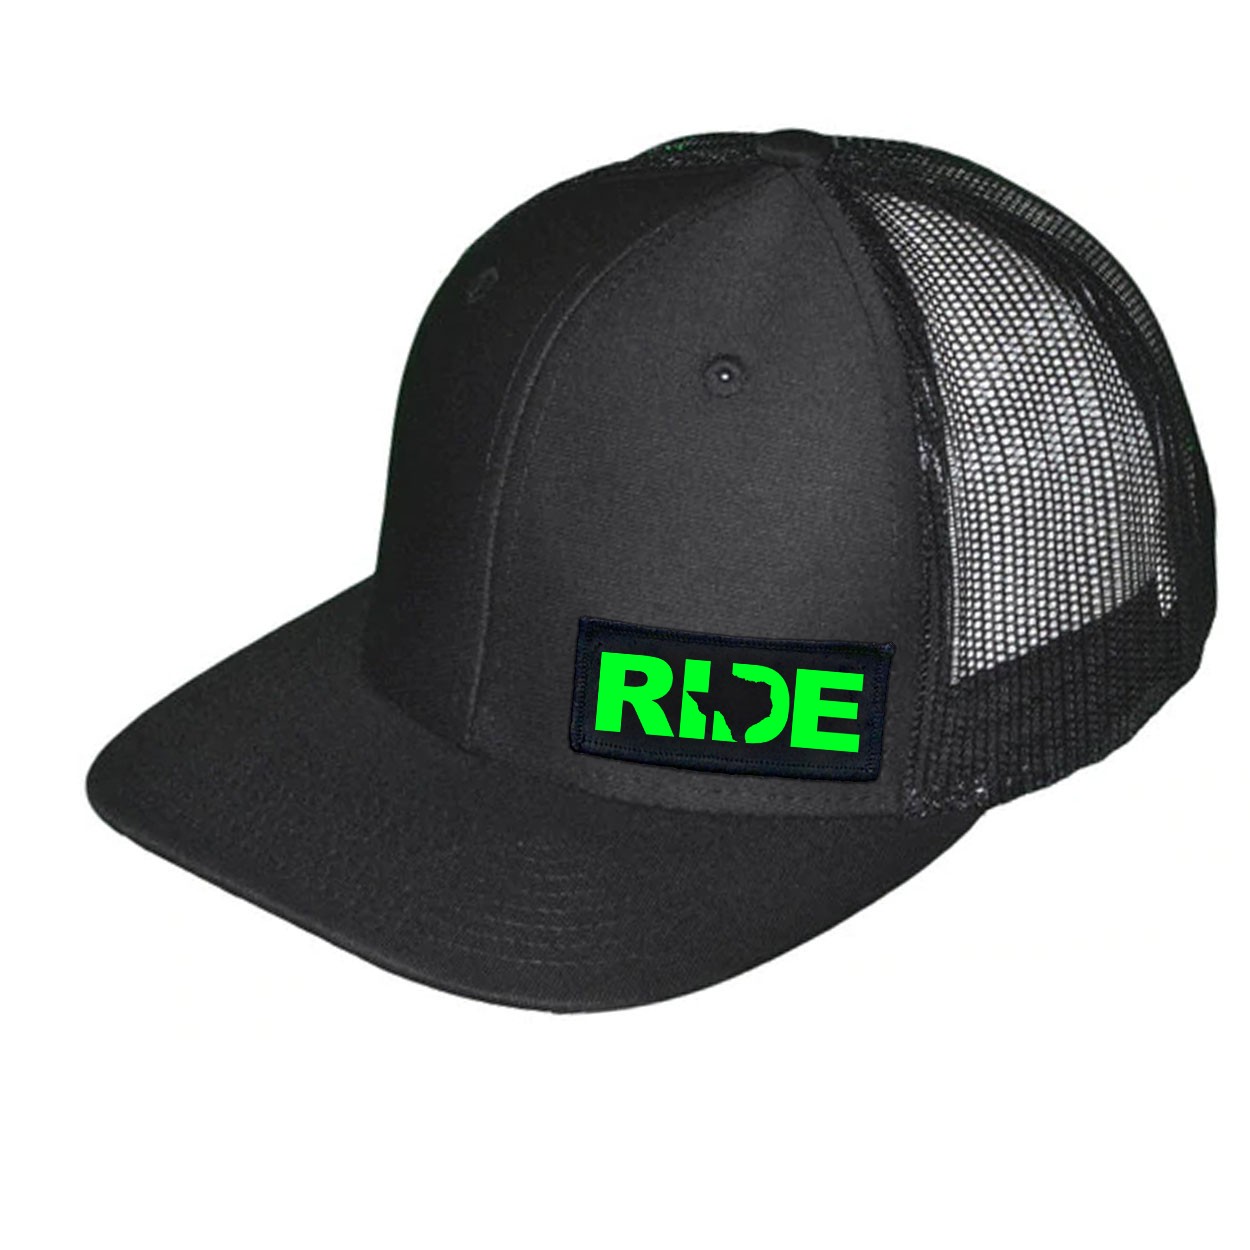 Ride Texas Night Out Woven Patch Snapback Trucker Hat Black (Green Logo)